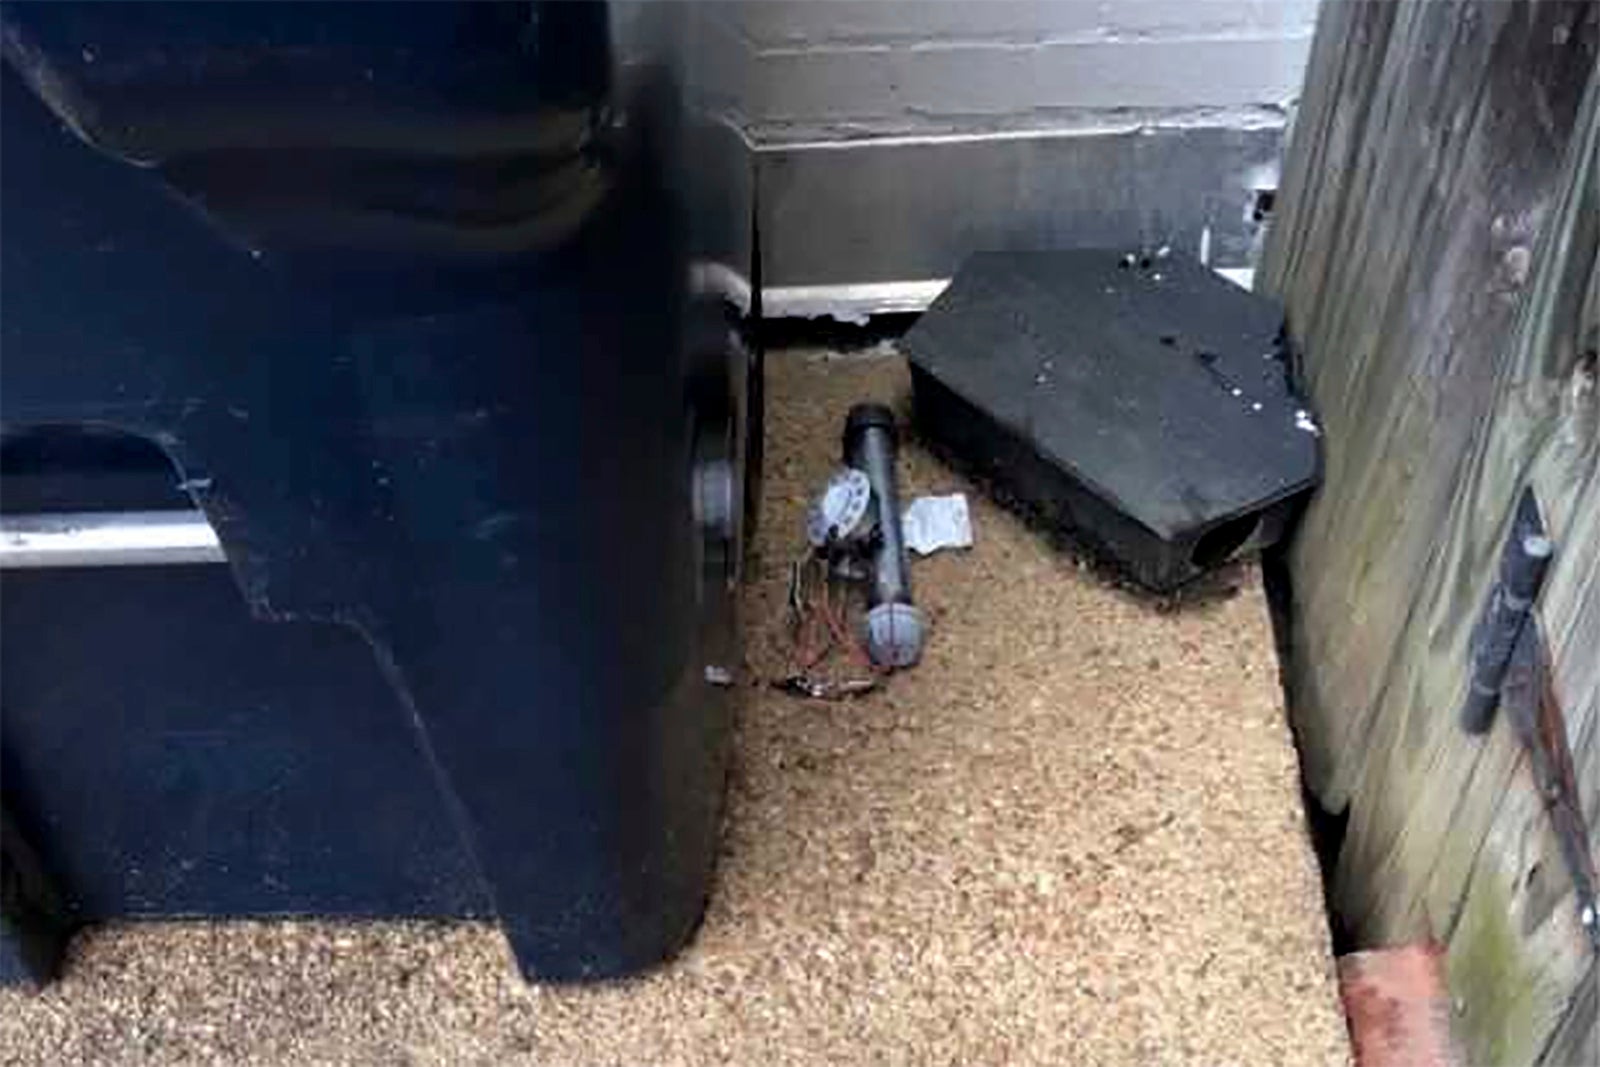 In this Jan. 6, 2021 photo, an explosive device is shown outside of the Republican National Committee office in Washington. The FBI has released new video showing someone placing two pipe bombs outside the offices of the Republican and Democratic national committees the night before the Jan. 6 riot at the U.S. Capitol.